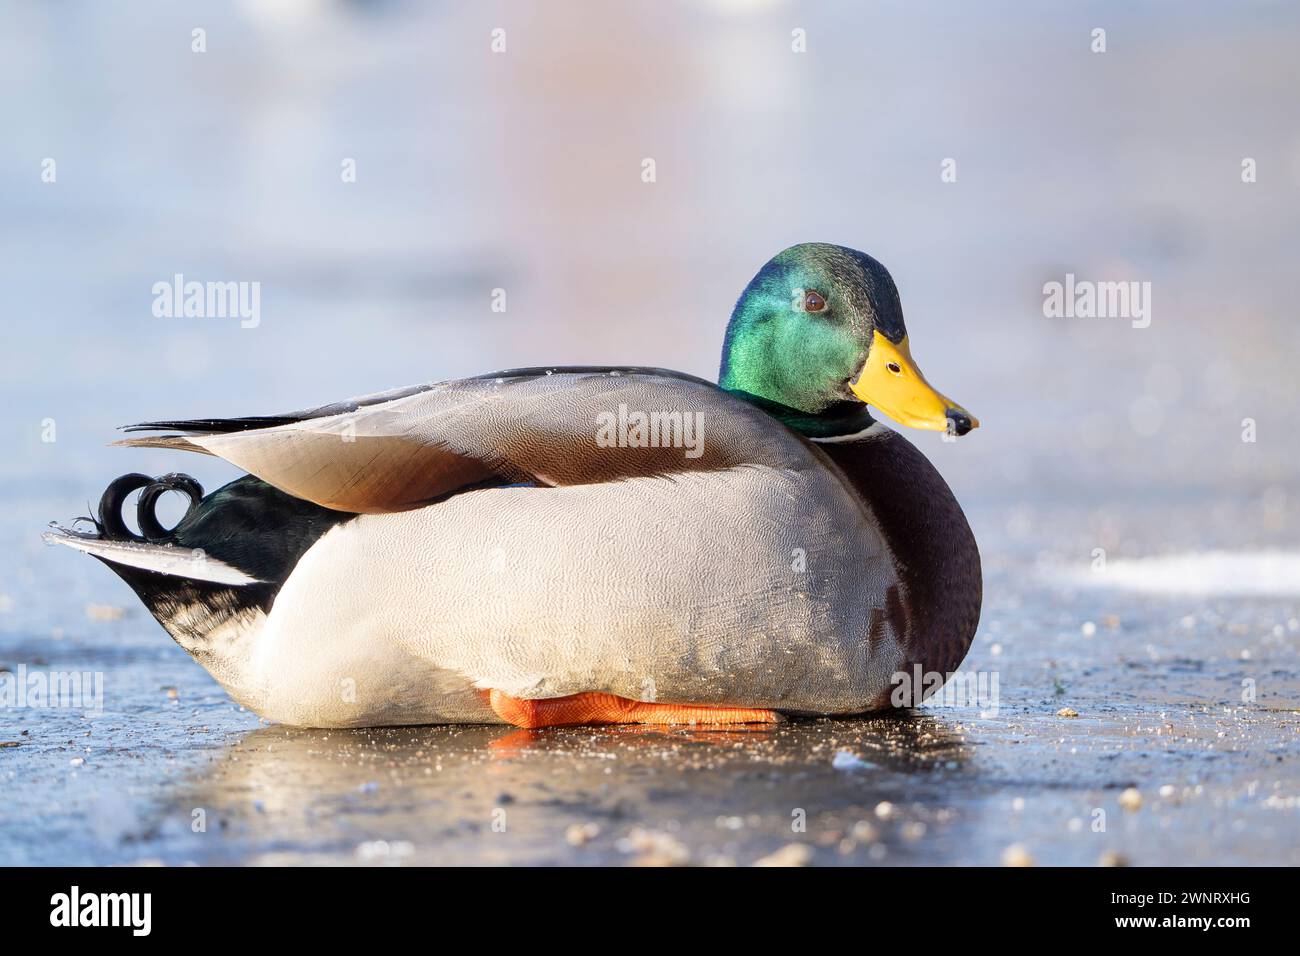 Kidderminster, UK. 19th January, 2024. UK weather: freezing conditions hit the UK as temperatures remain incredibly low and nature ponds remain frozen. A mallard duck sits on a frozen pool enjoying the bright sunshine today. Credit: Lee Hudson/Alamy Stock Photo